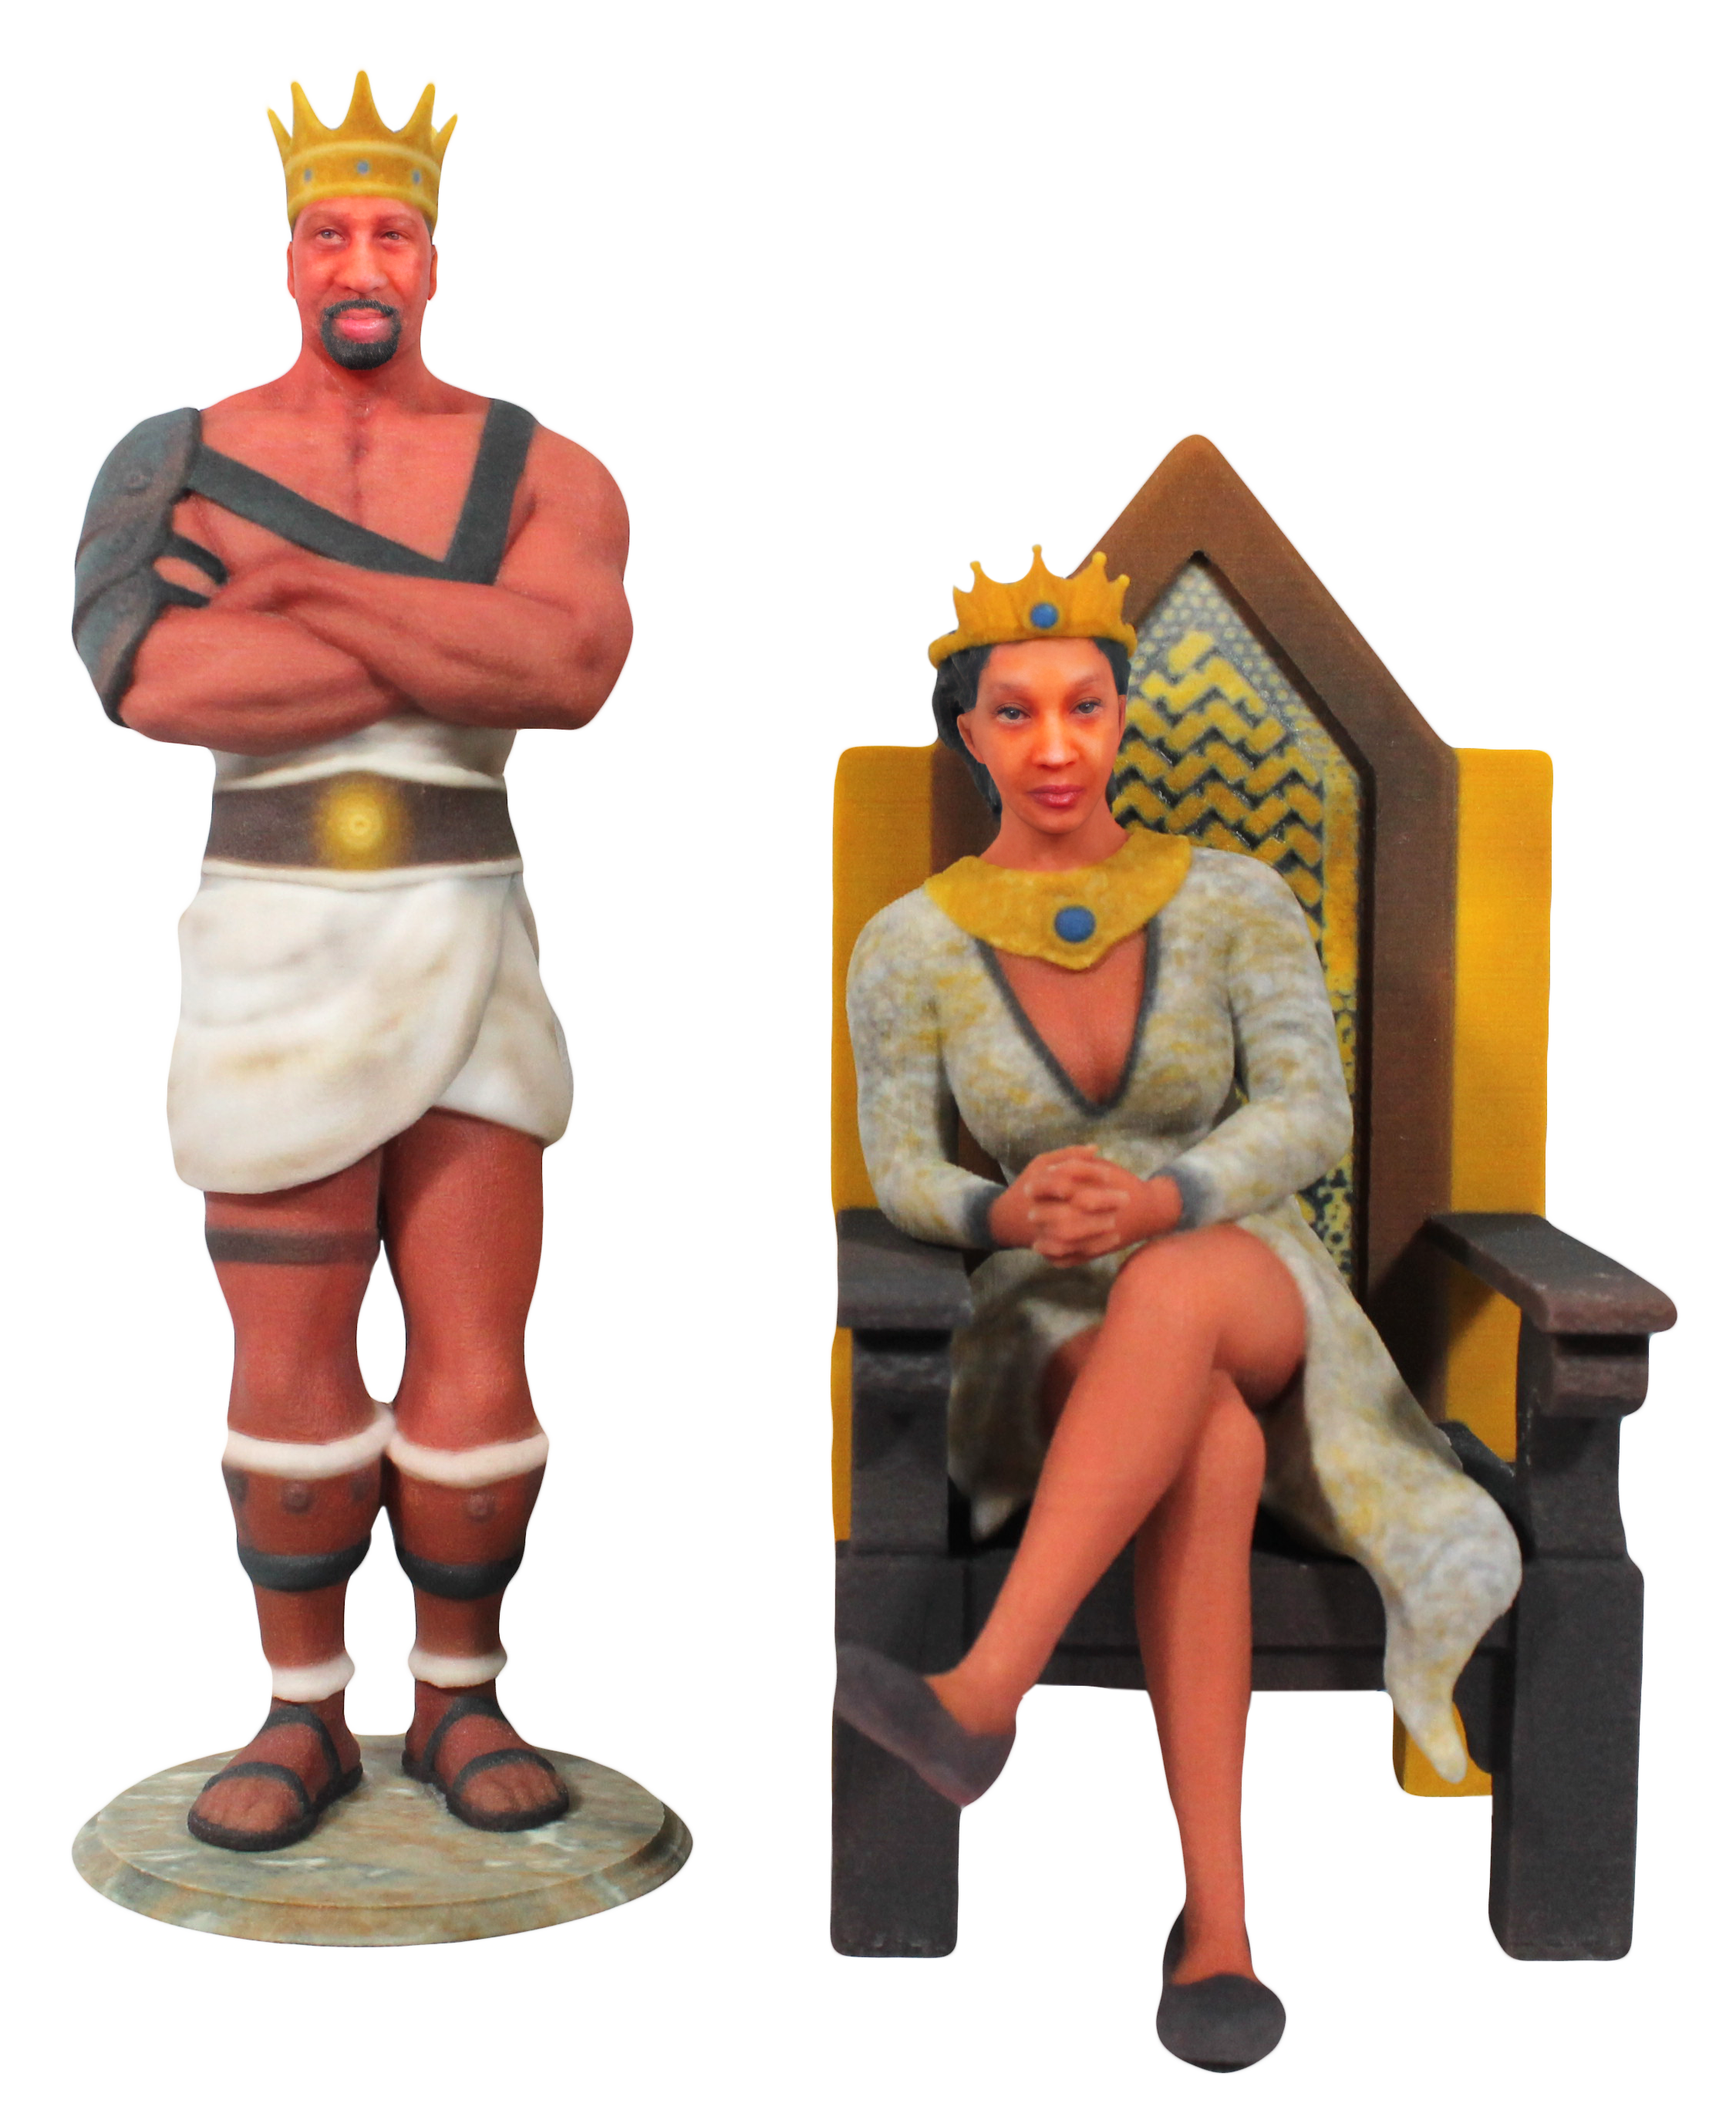 Collectible figures - two people with chair